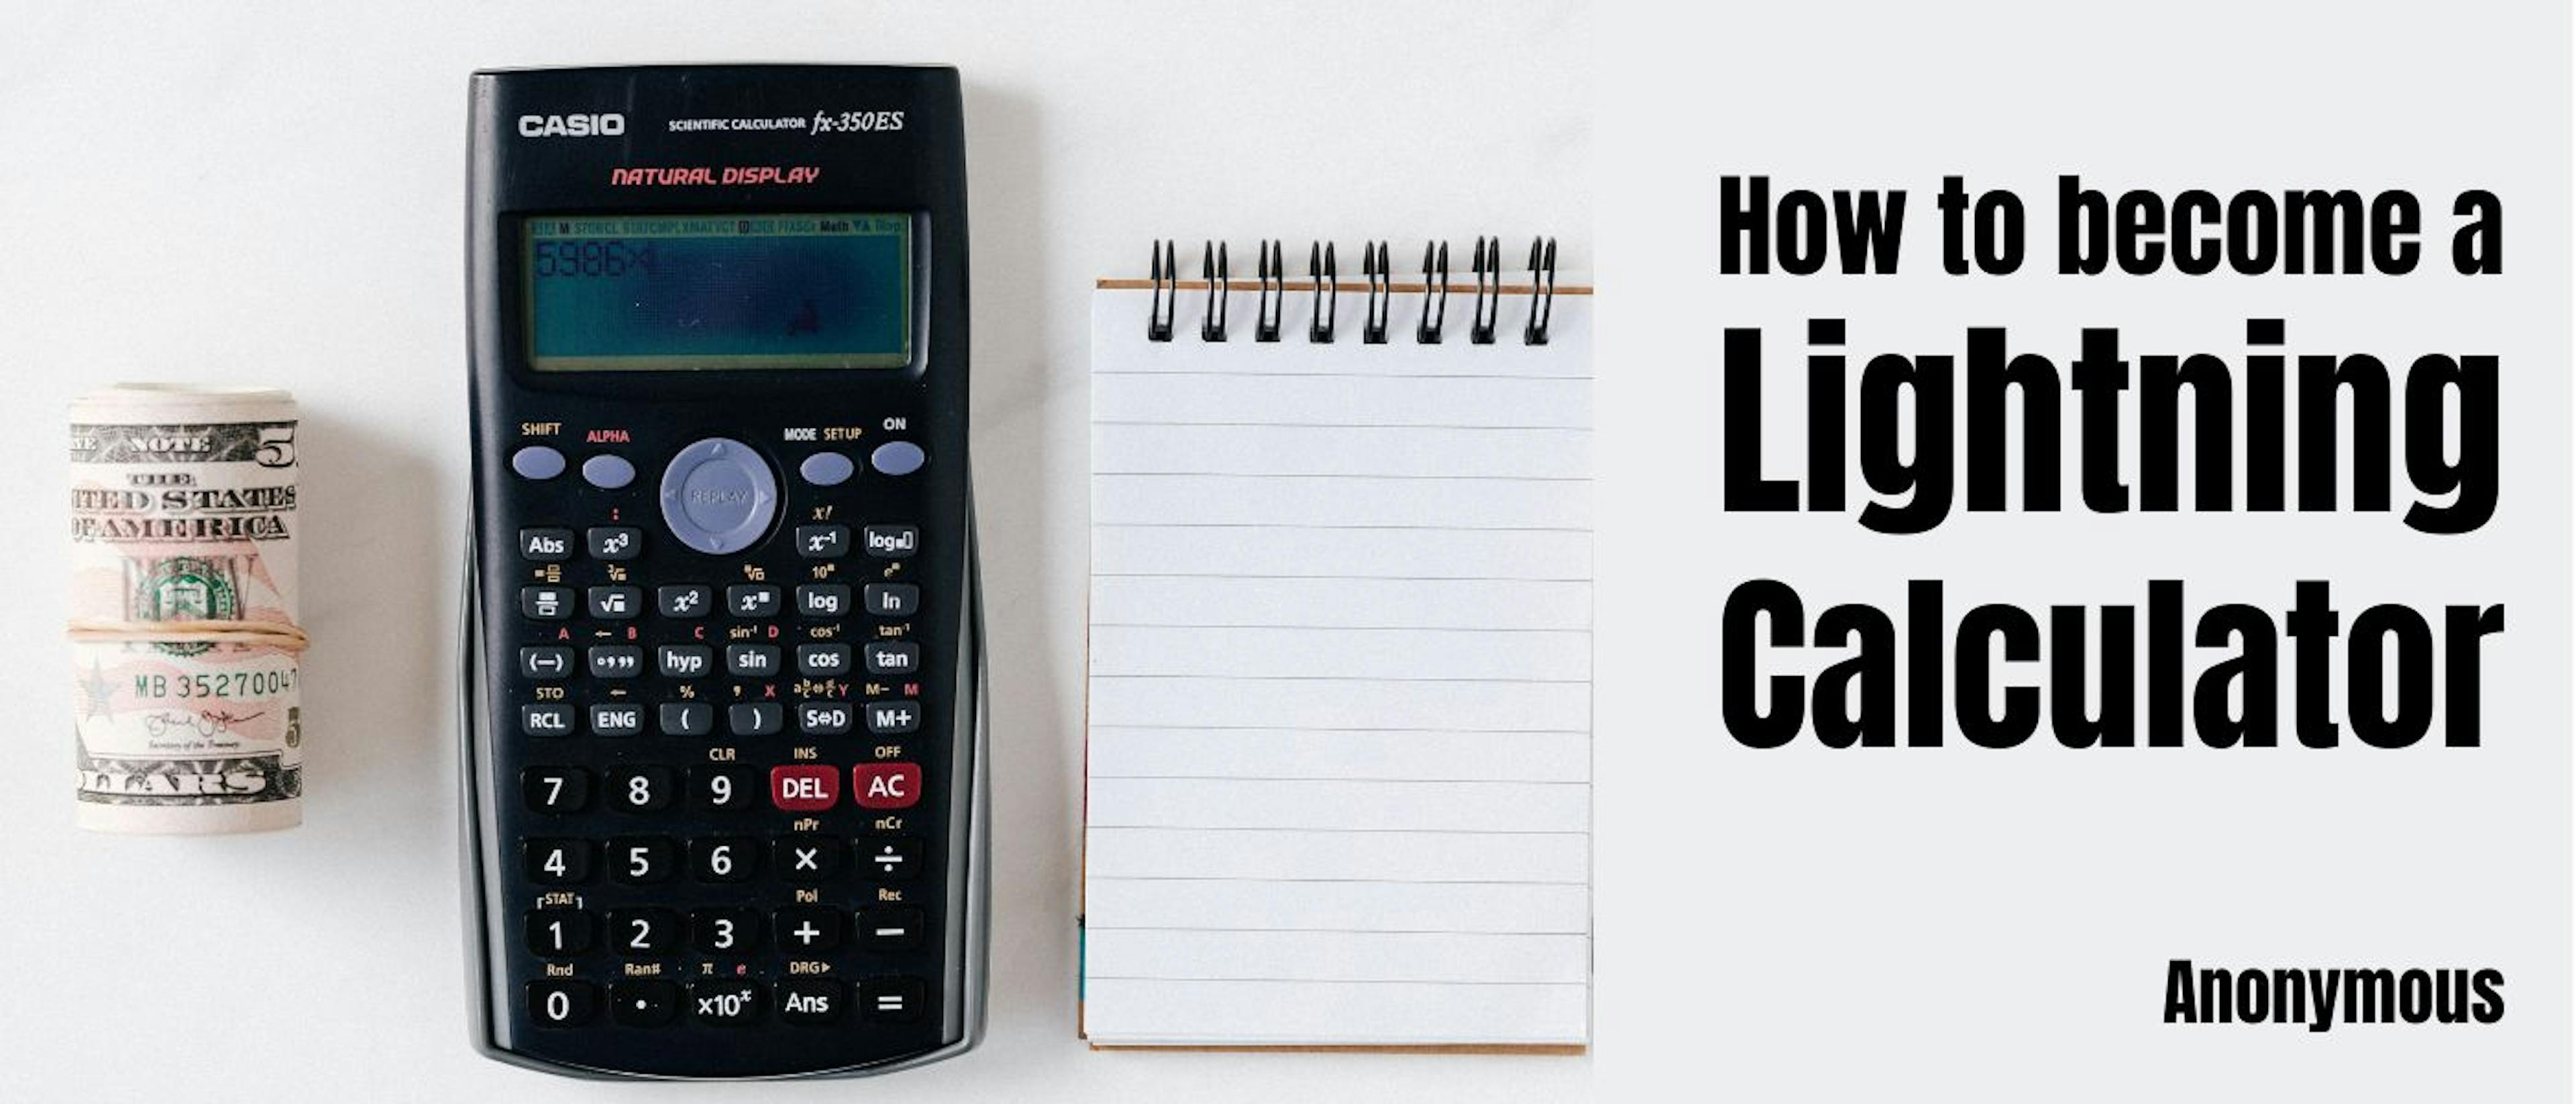 featured image - How to become a Lightning Calculator by Anonymous - Table of Links